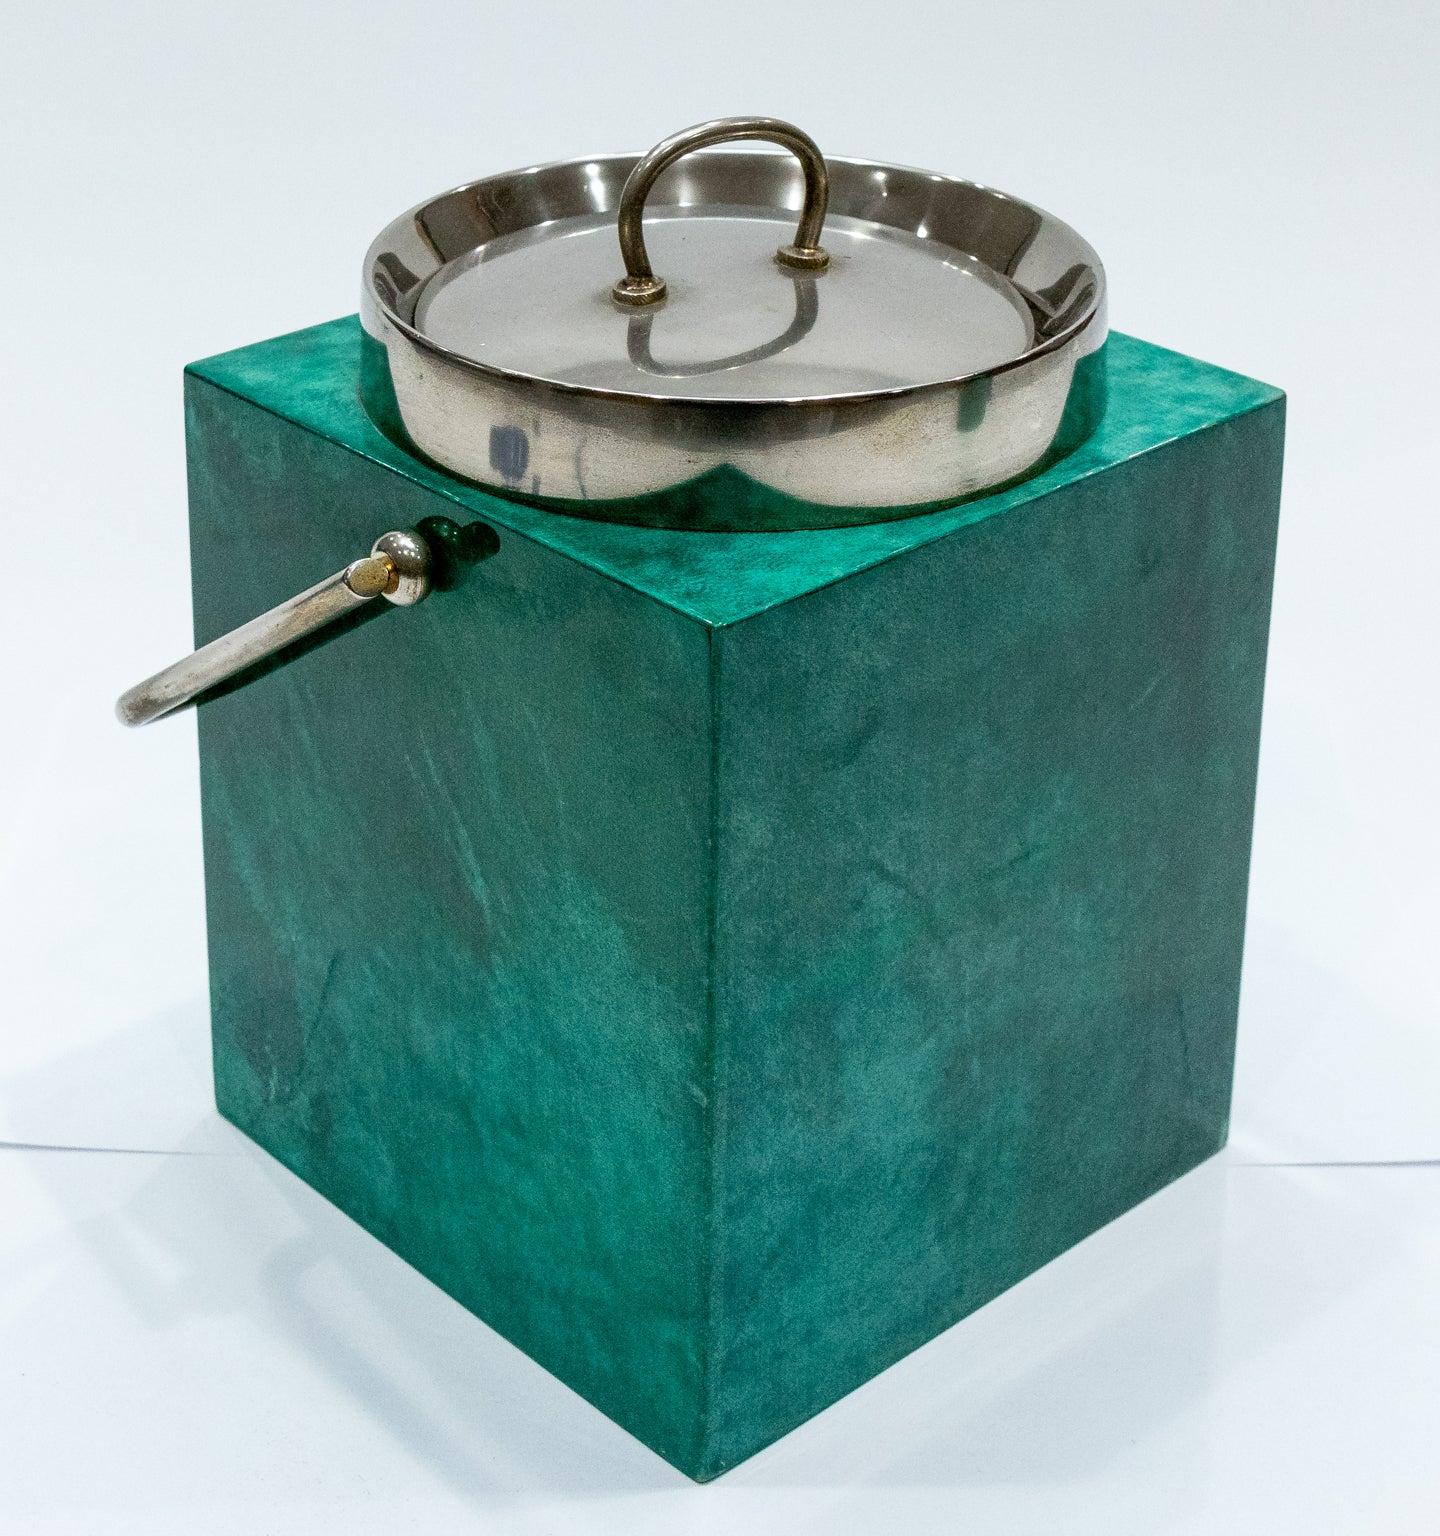 Aldo Tura varnished green goatskin wrapped ice bucket with metal handle and lid, manufactured in Italy during the 1960s. Please note wear consistent with age.
 